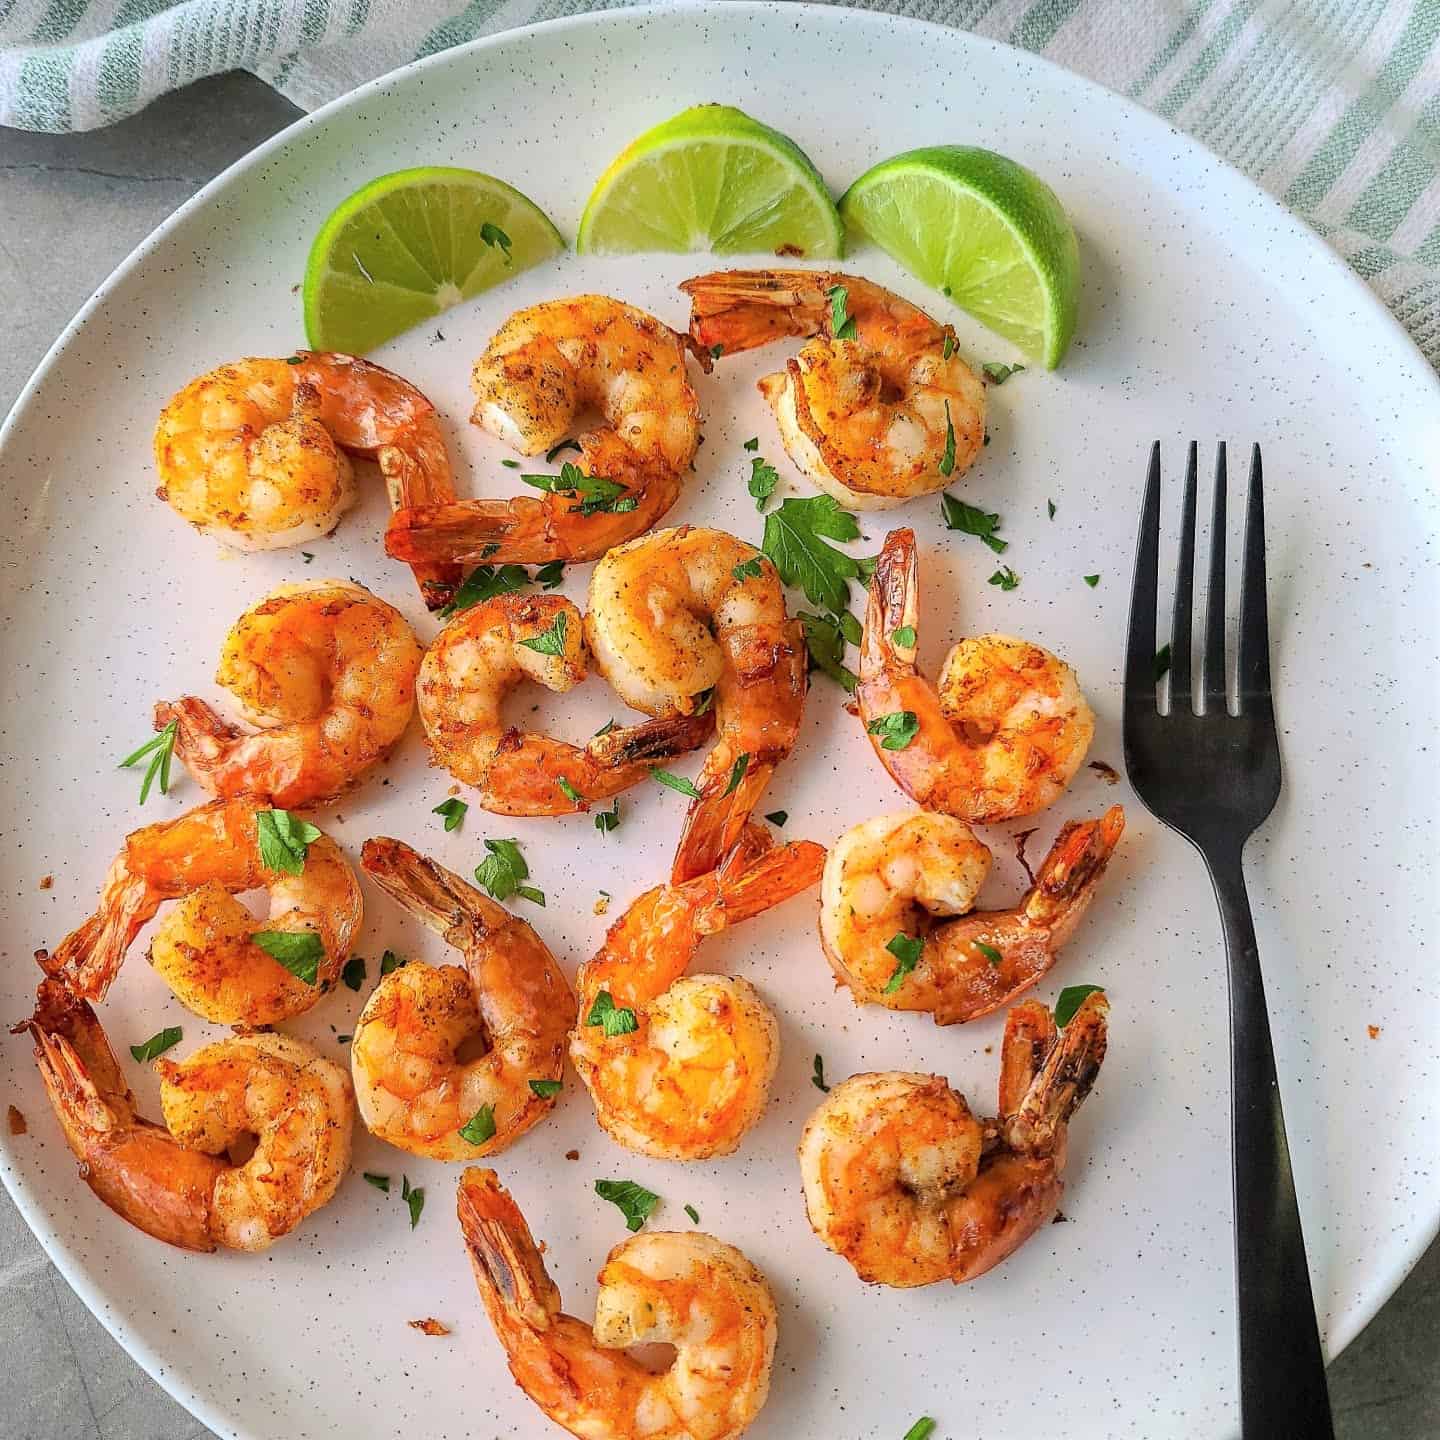 Air fryer shrimps plated with limes